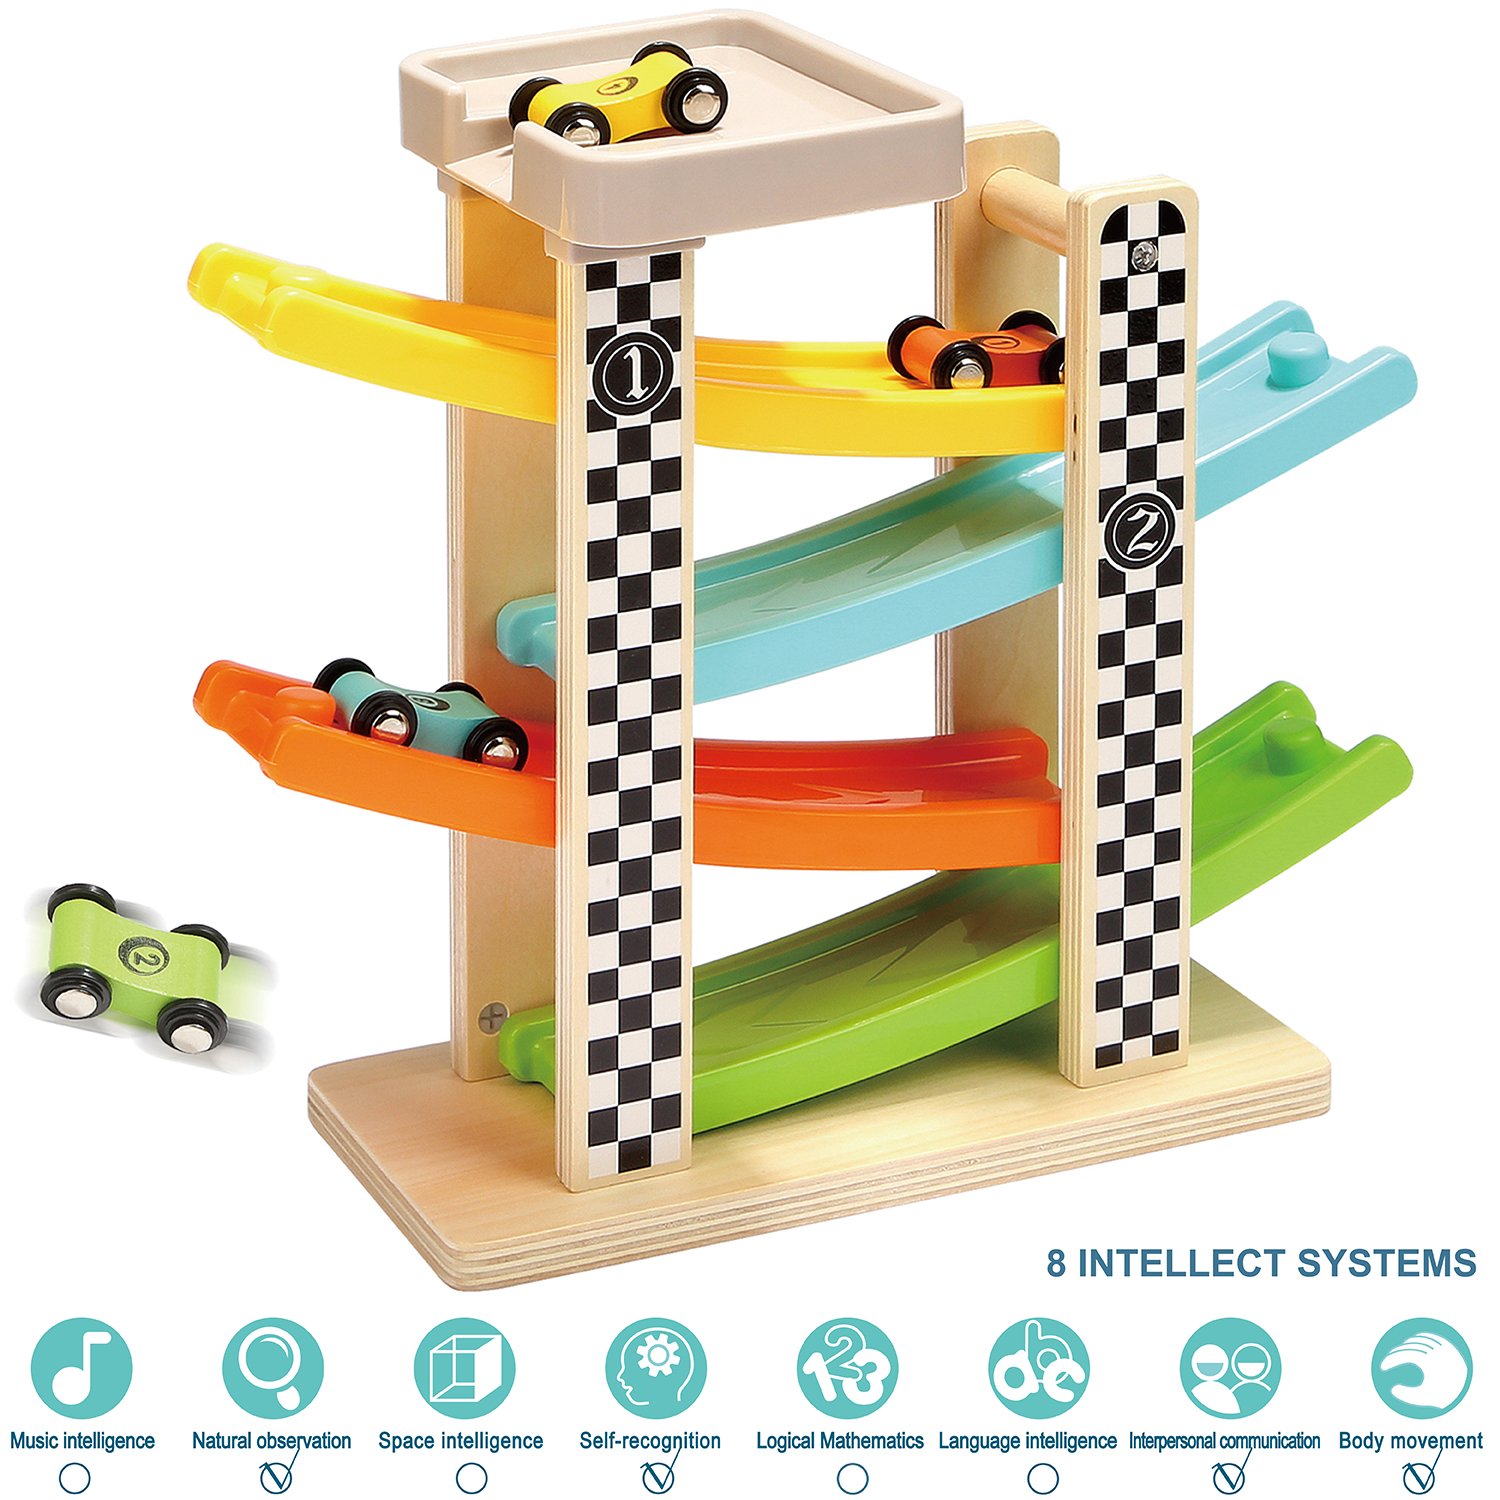 TOP BRIGHT Toddler Toys For 1 2 Year Old Boy And Girl Gifts Wooden Race Track Car Ramp Racer With 4 Mini Cars